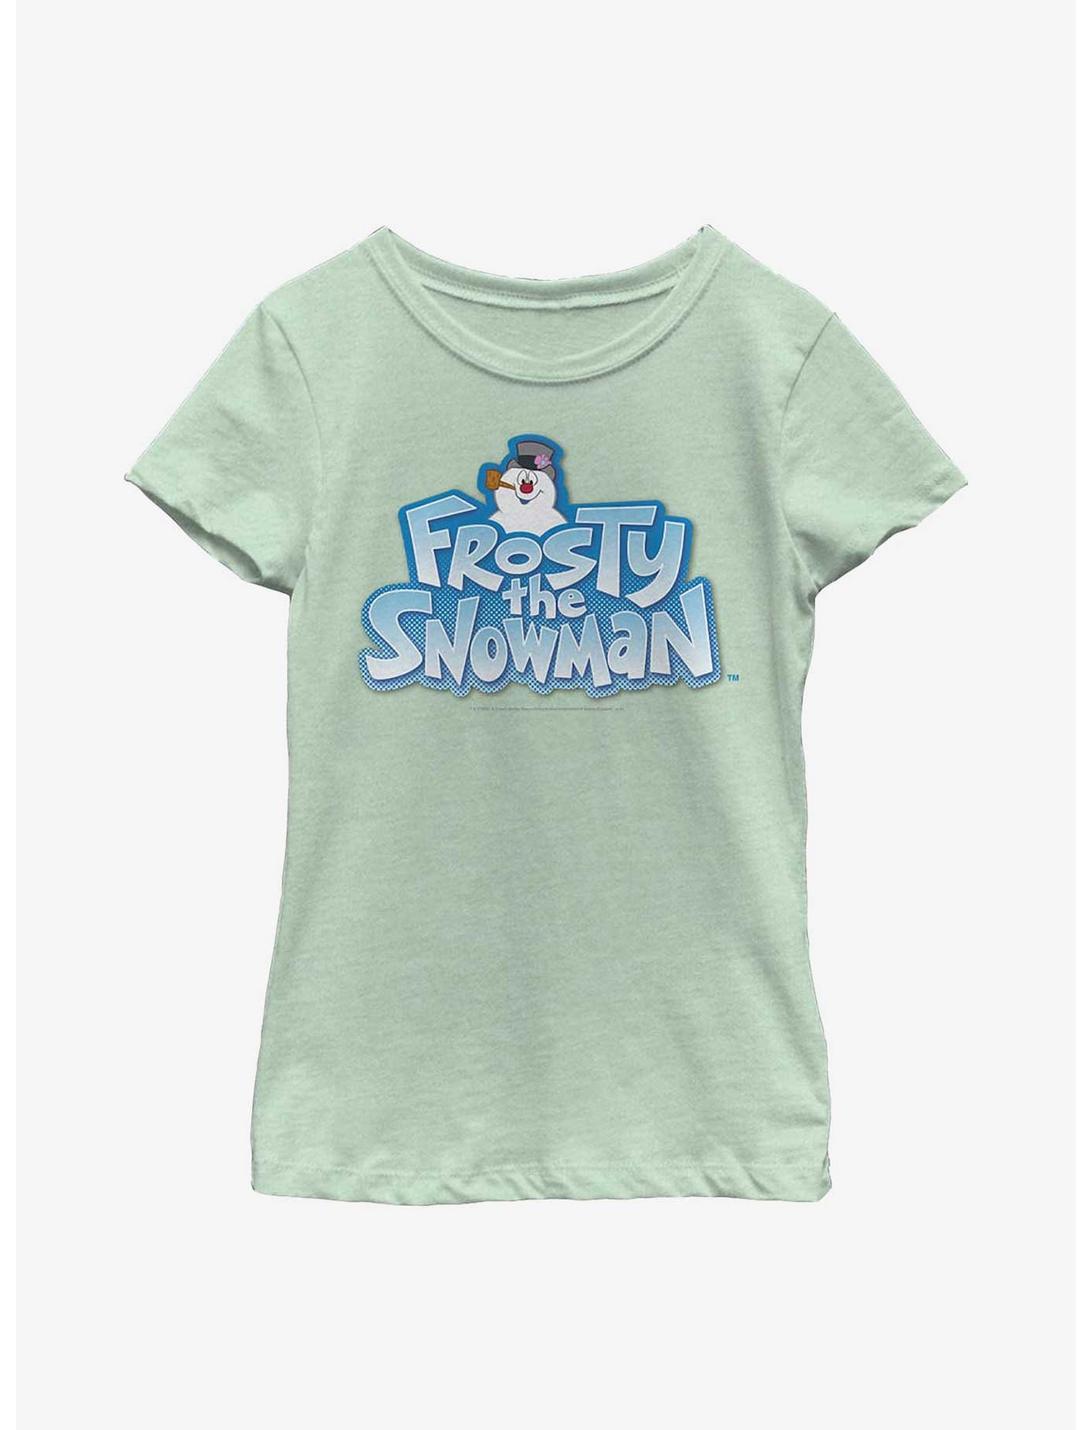 Frosty The Snowman Logo Youth Girls T-Shirt, MINT, hi-res